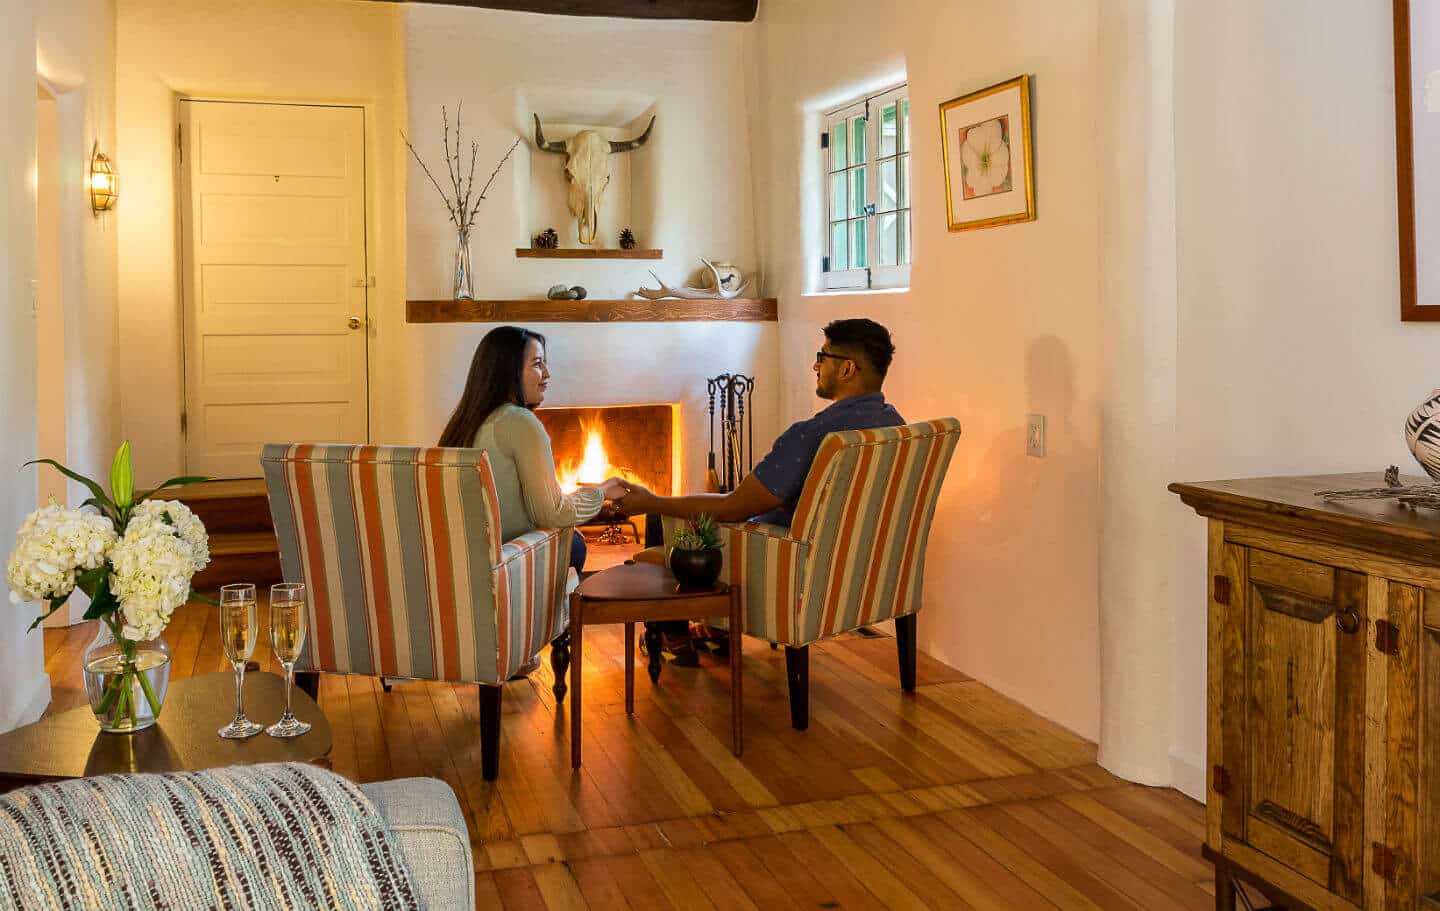 Couple sitting holding hands in front of burning fire in fireplace in the Georgia Okeeffe guest room